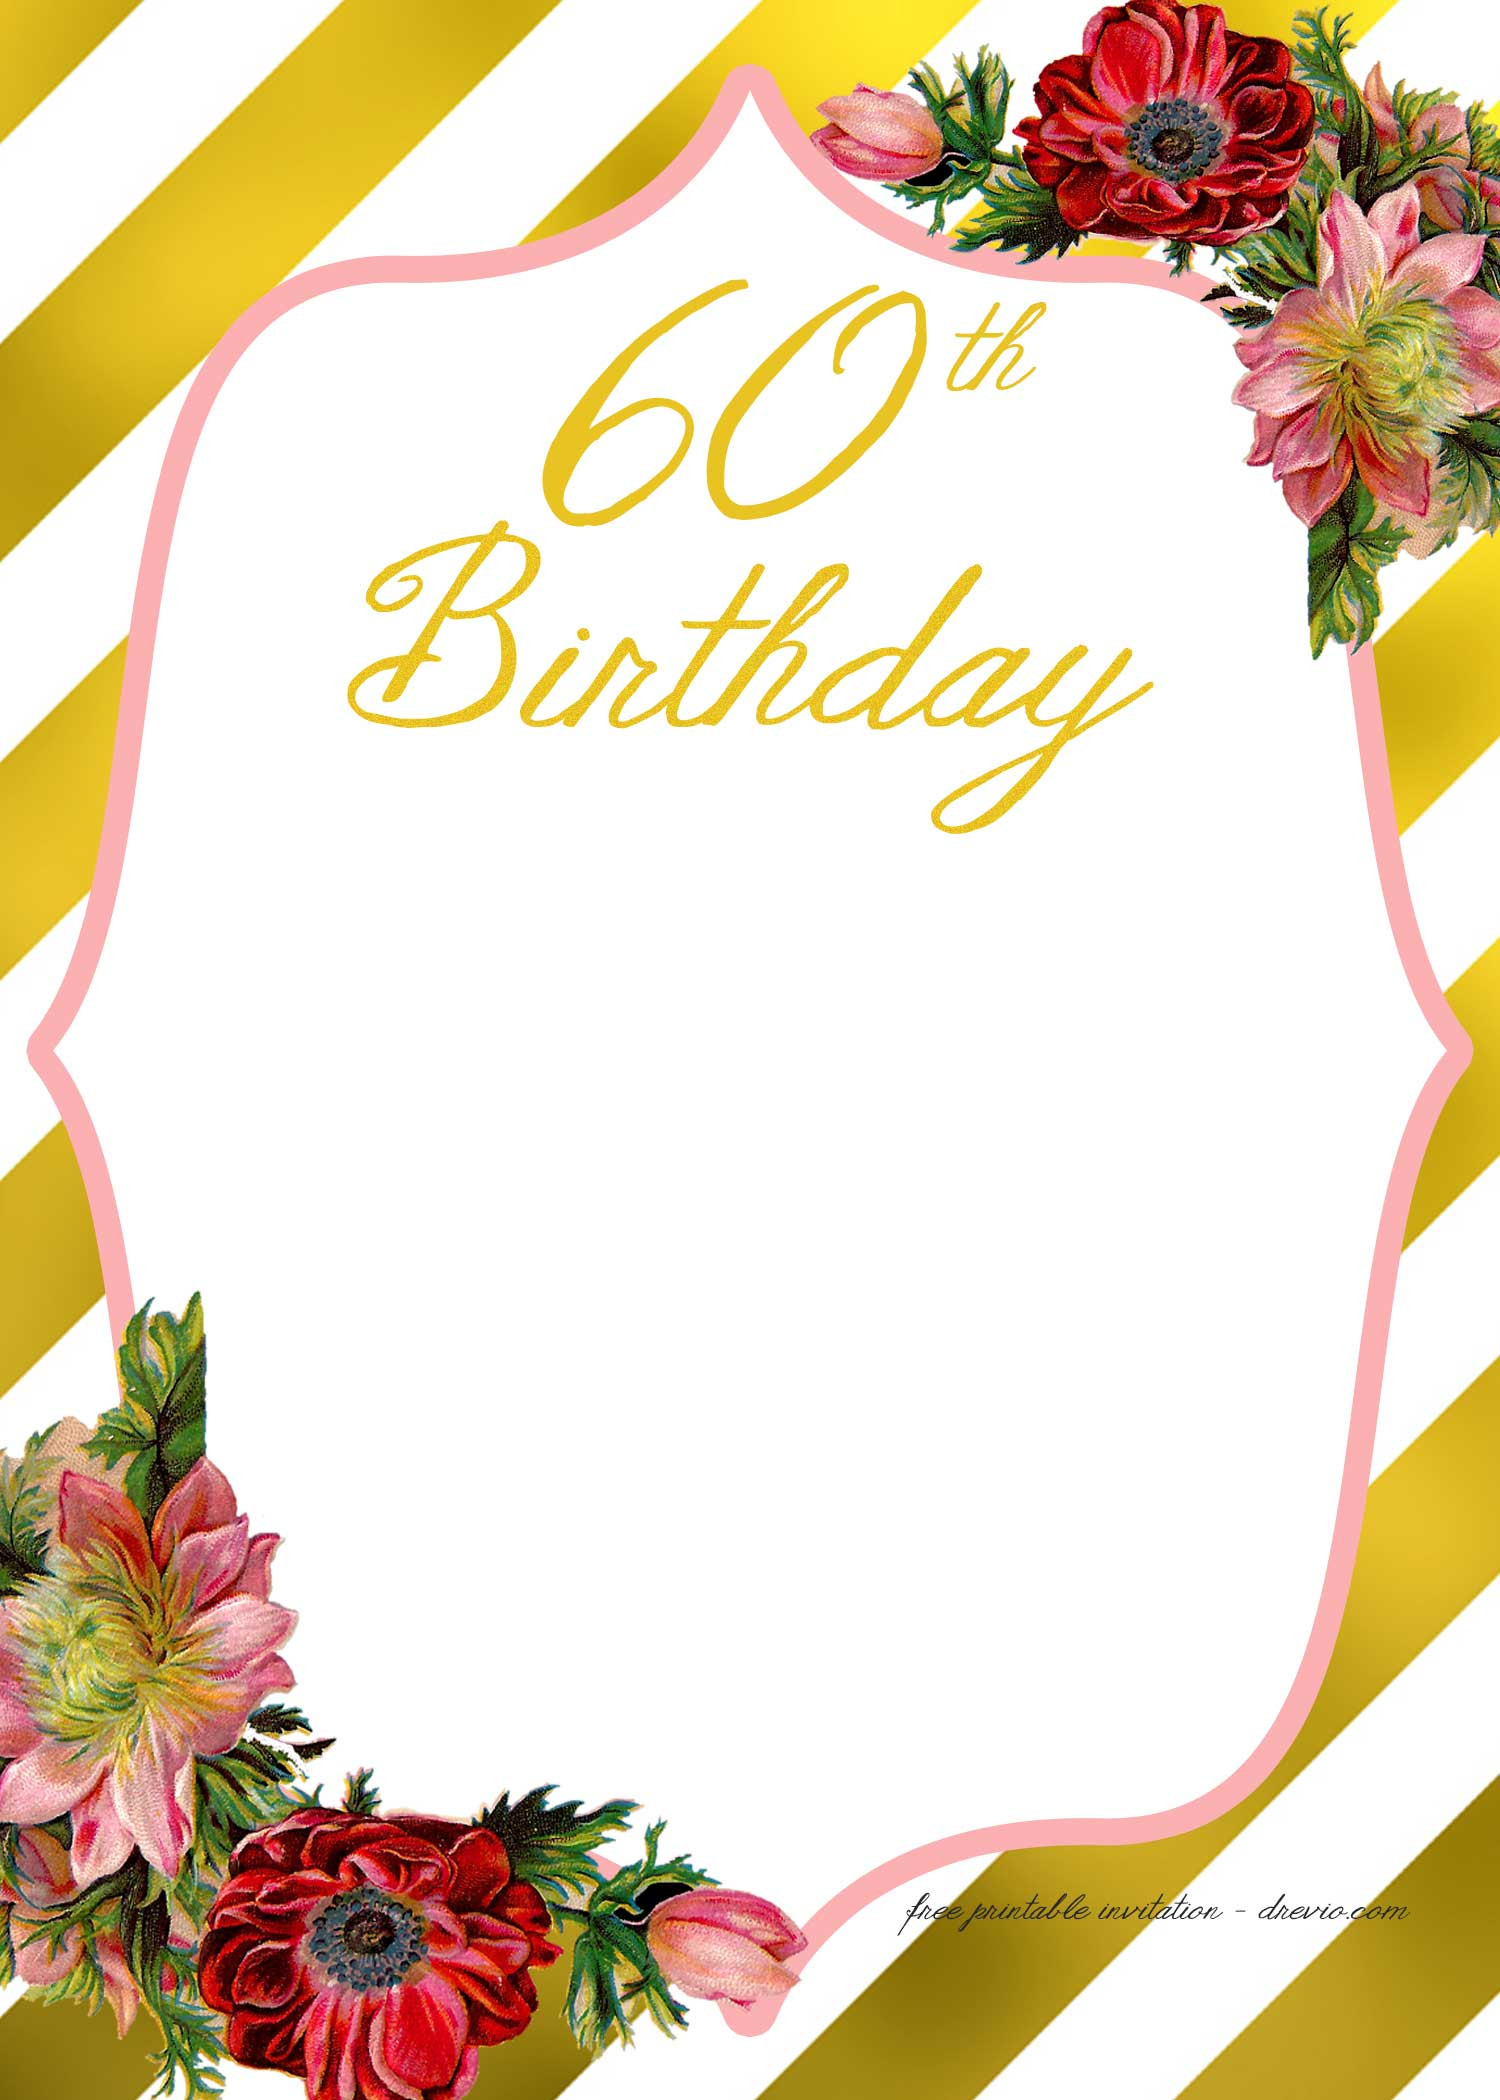 Birthday Invitation Template Free
 Adult Birthday Invitations Template for 50th years old